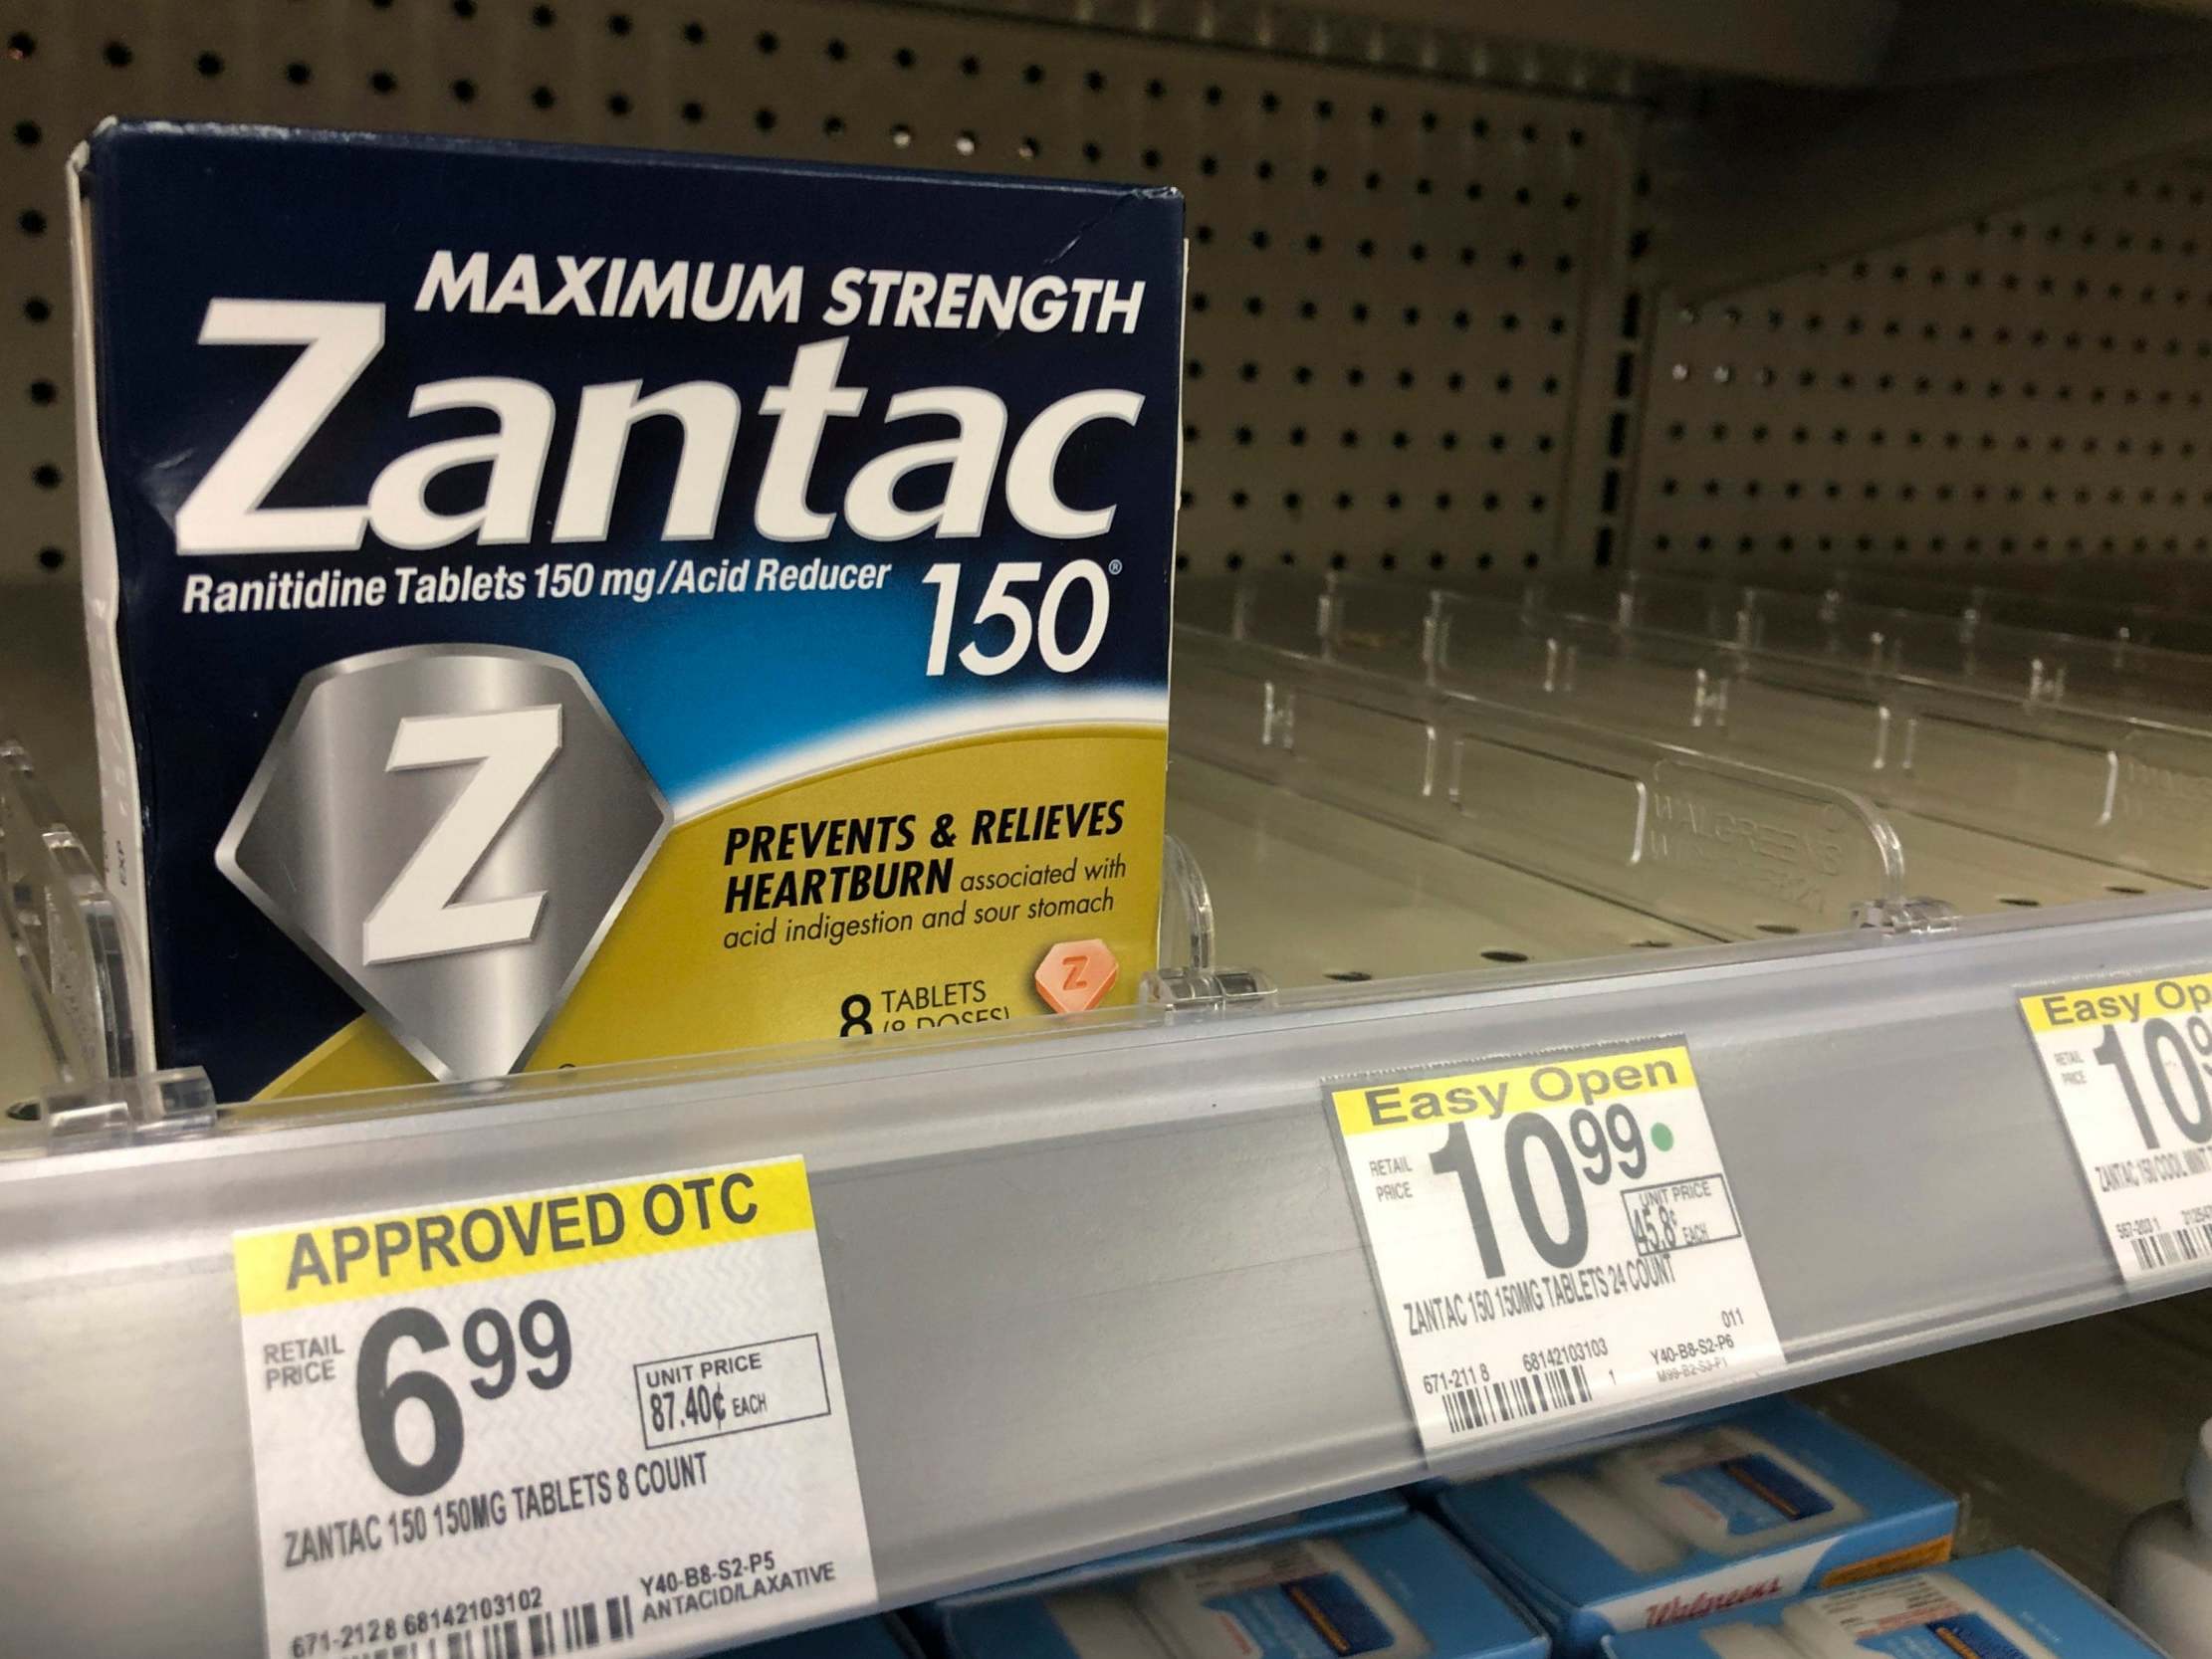 Zantac products banned for containing substances linked to cancer